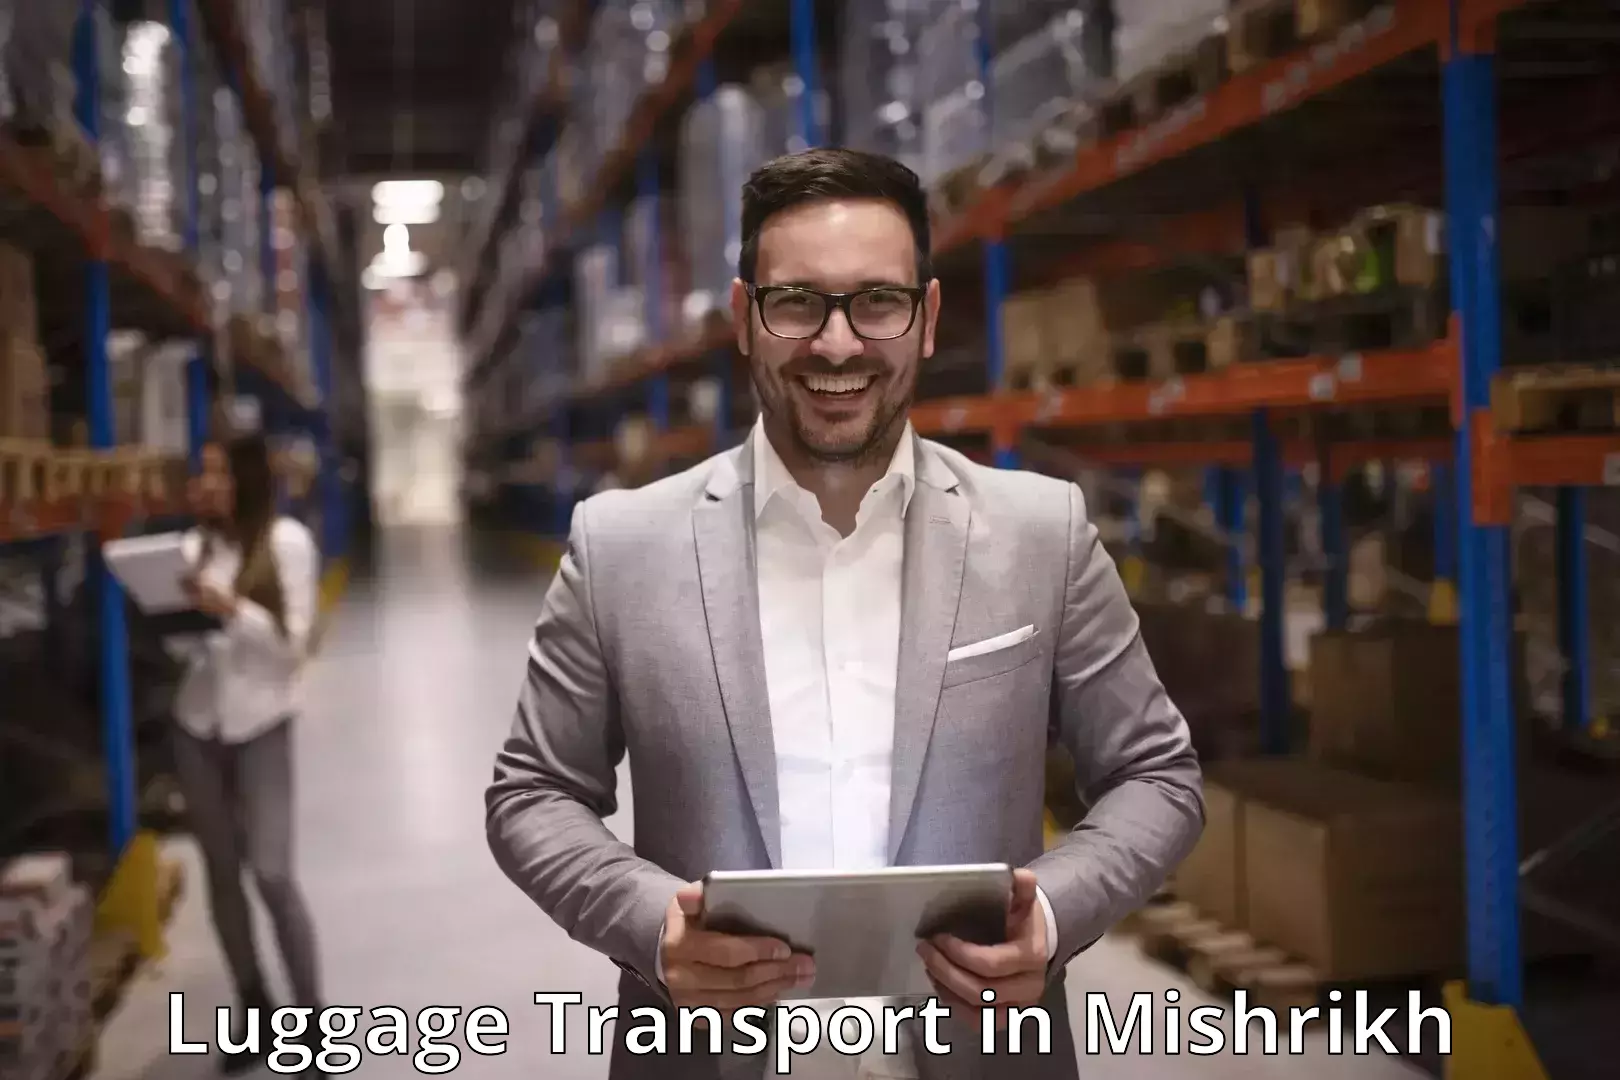 Luggage transport consulting in Mishrikh